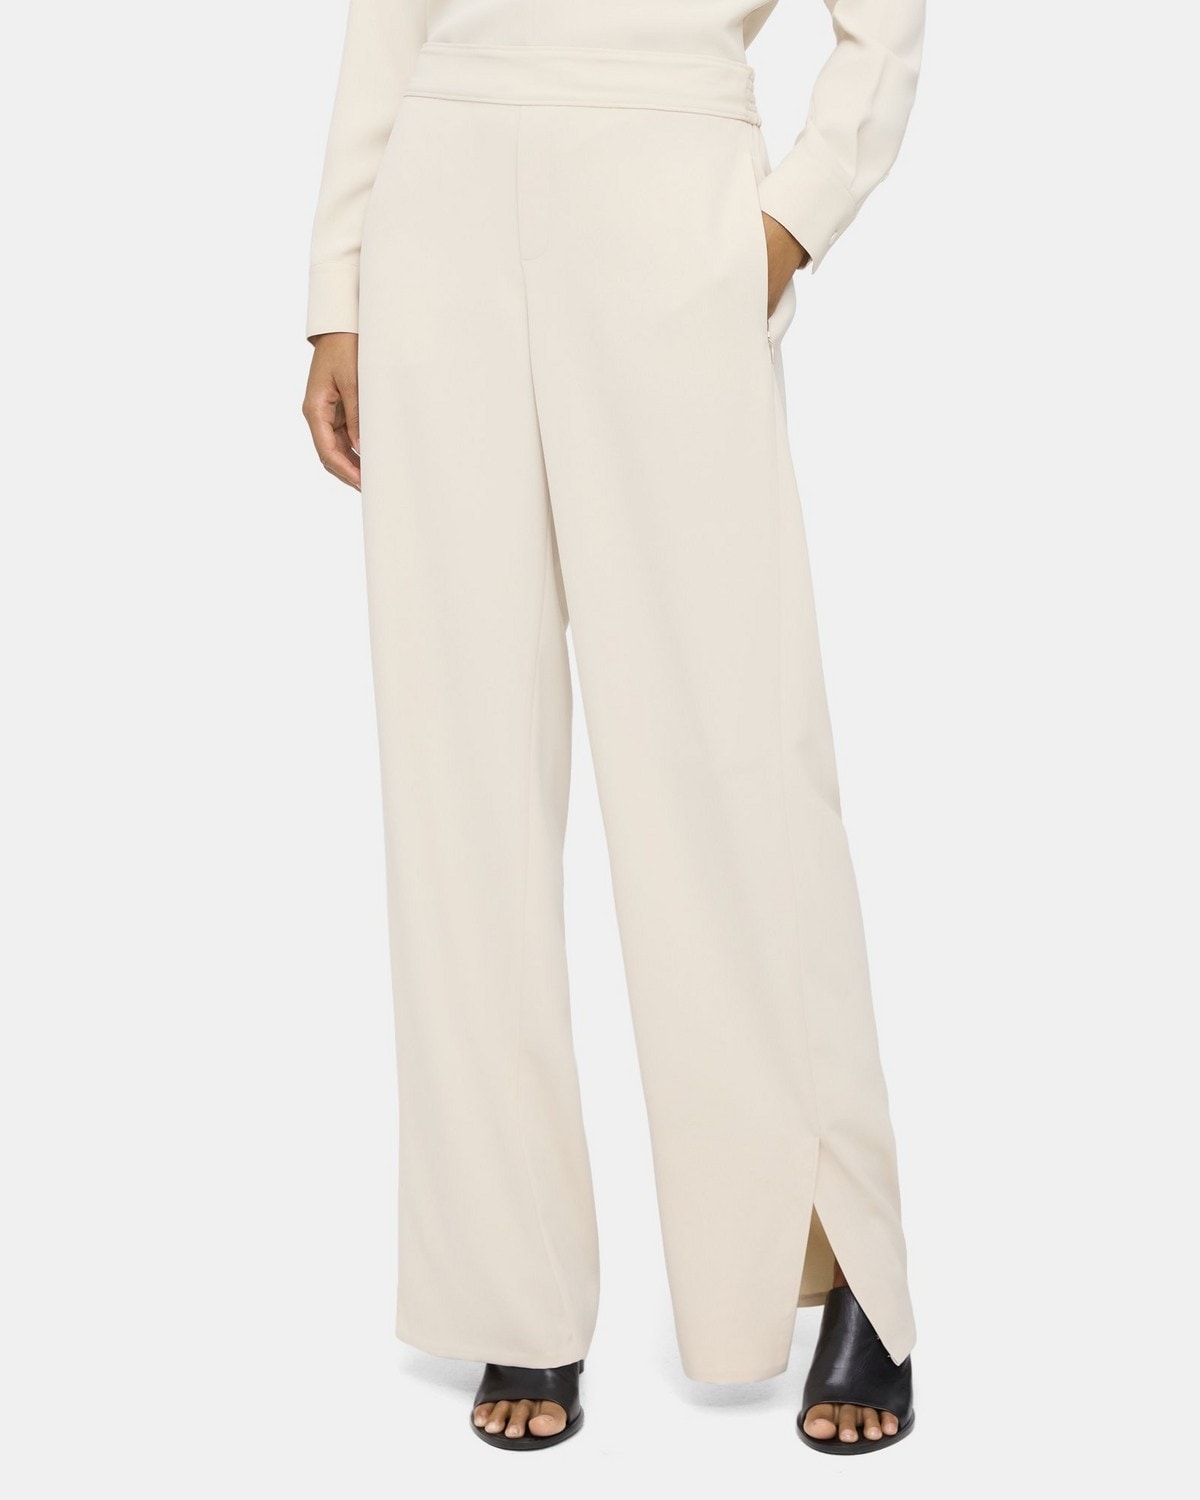 Straight Pull-On Pant in Twill Poly